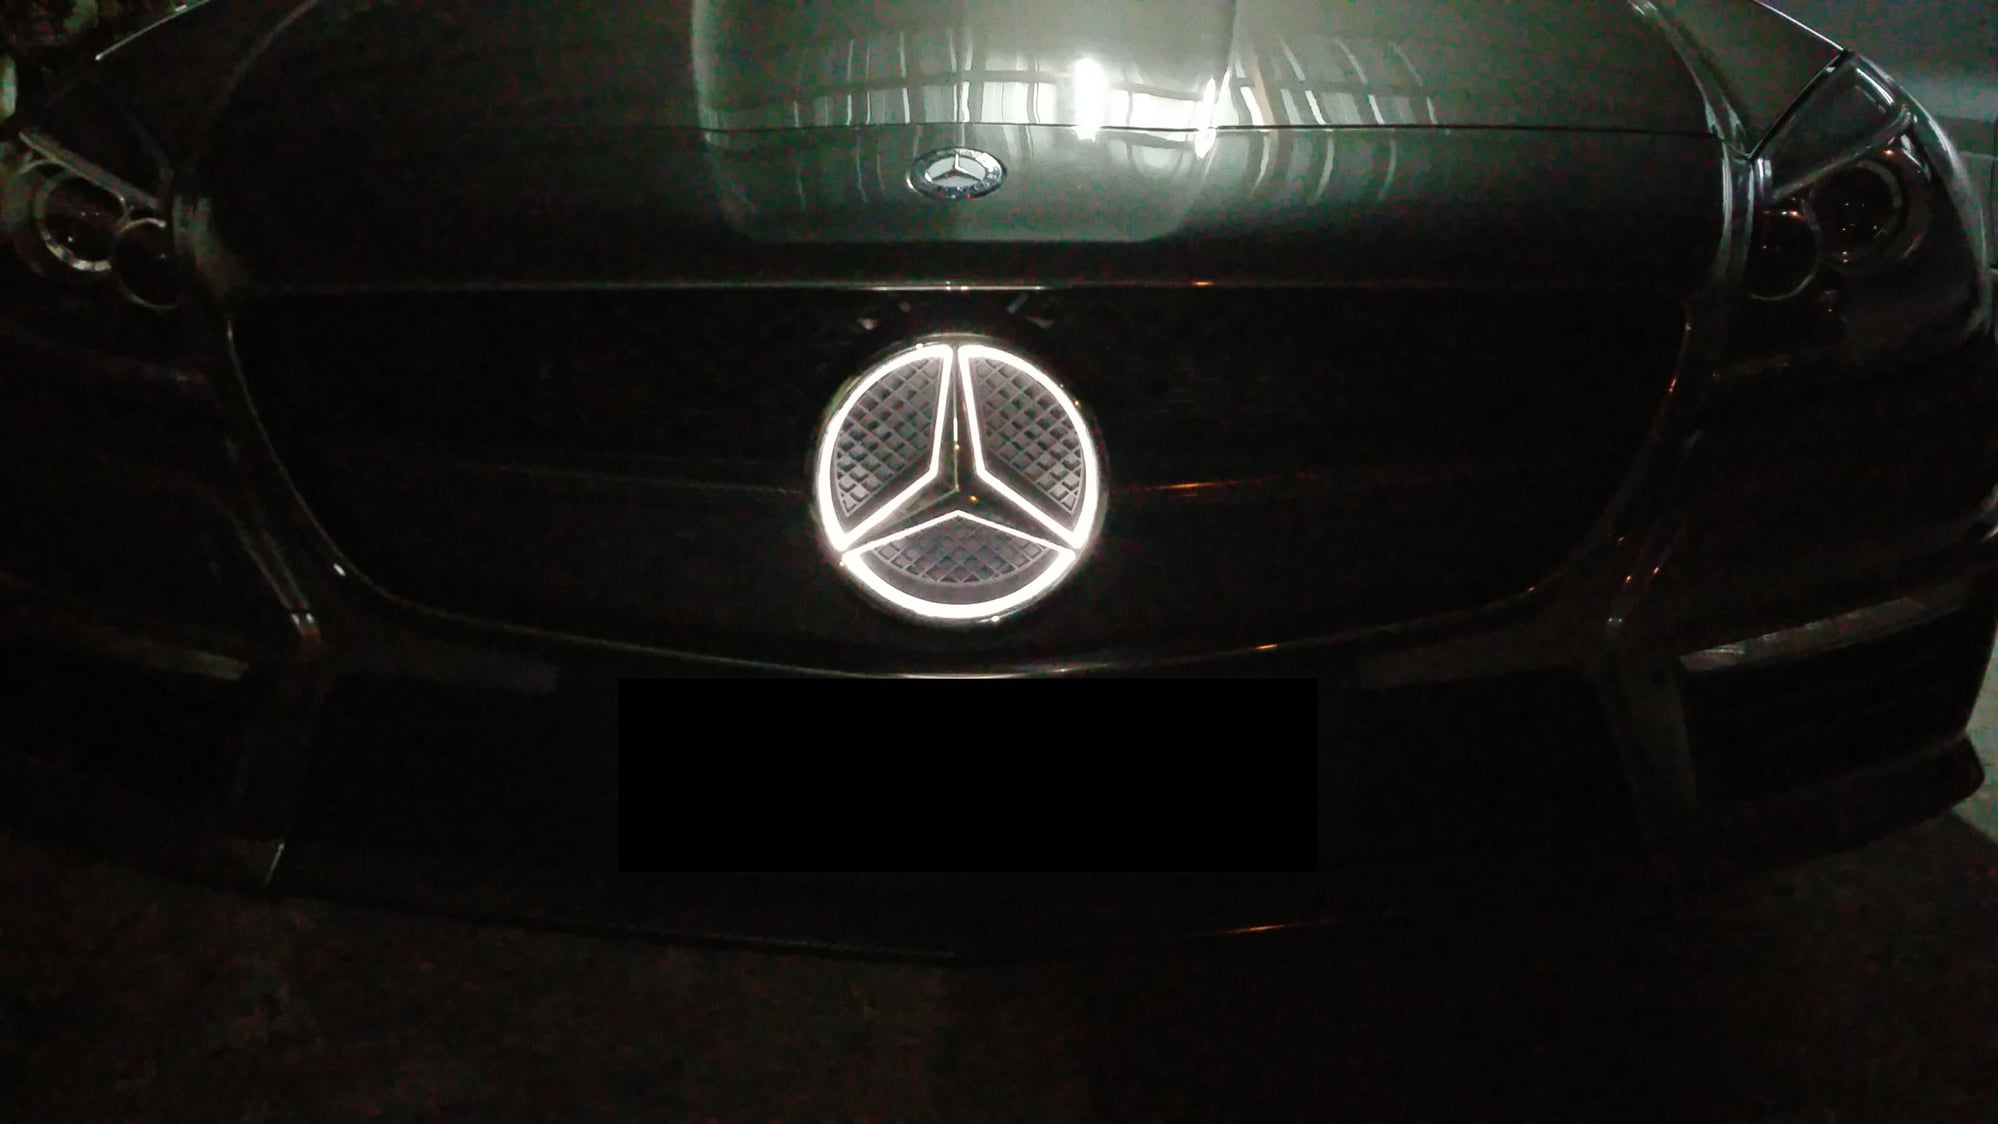 Illuminated star fitted. - Page 6 -  Forums